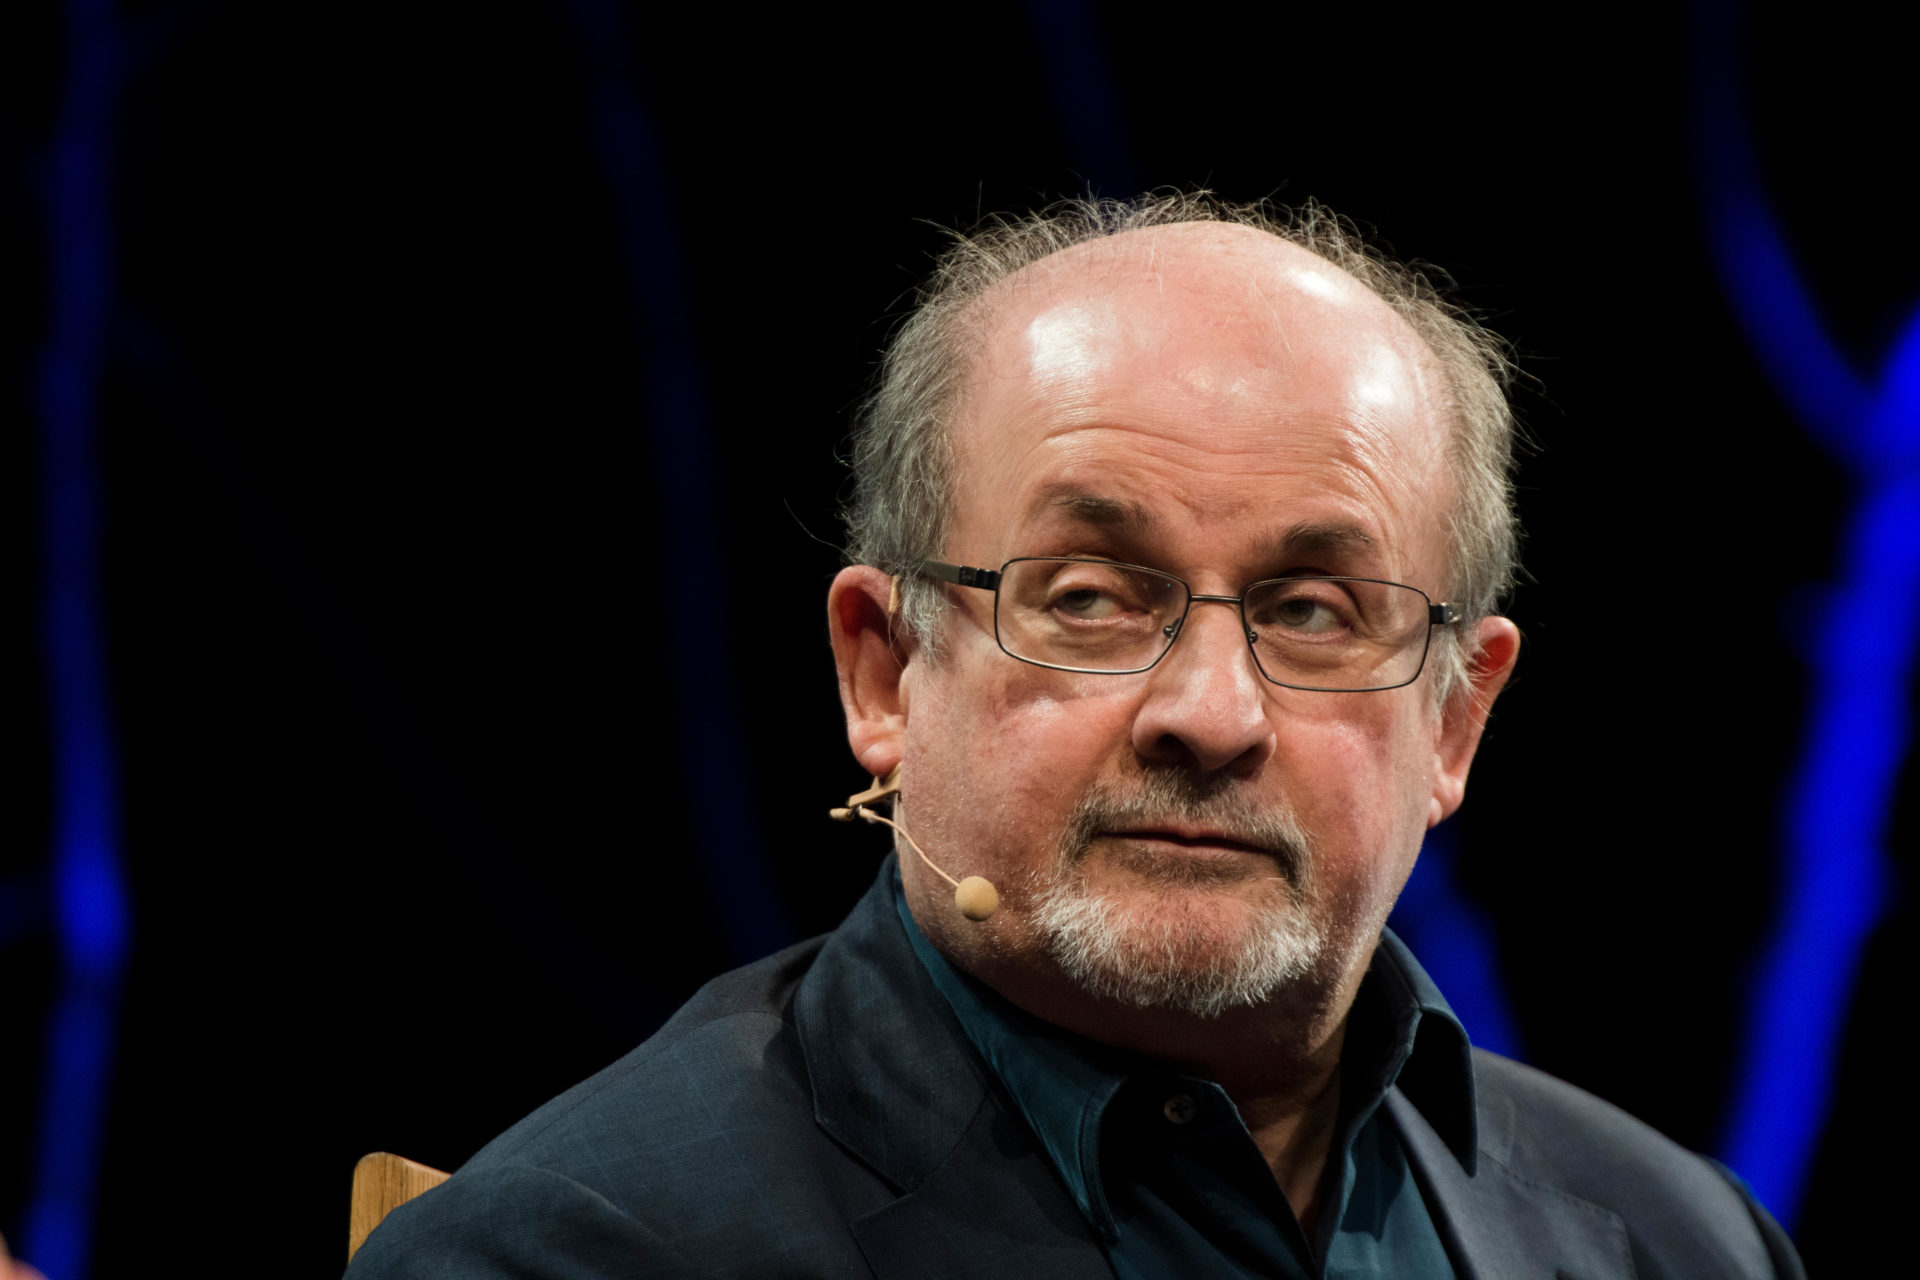 Author Salman Rushdie attacked on stage in New York | Newstalk